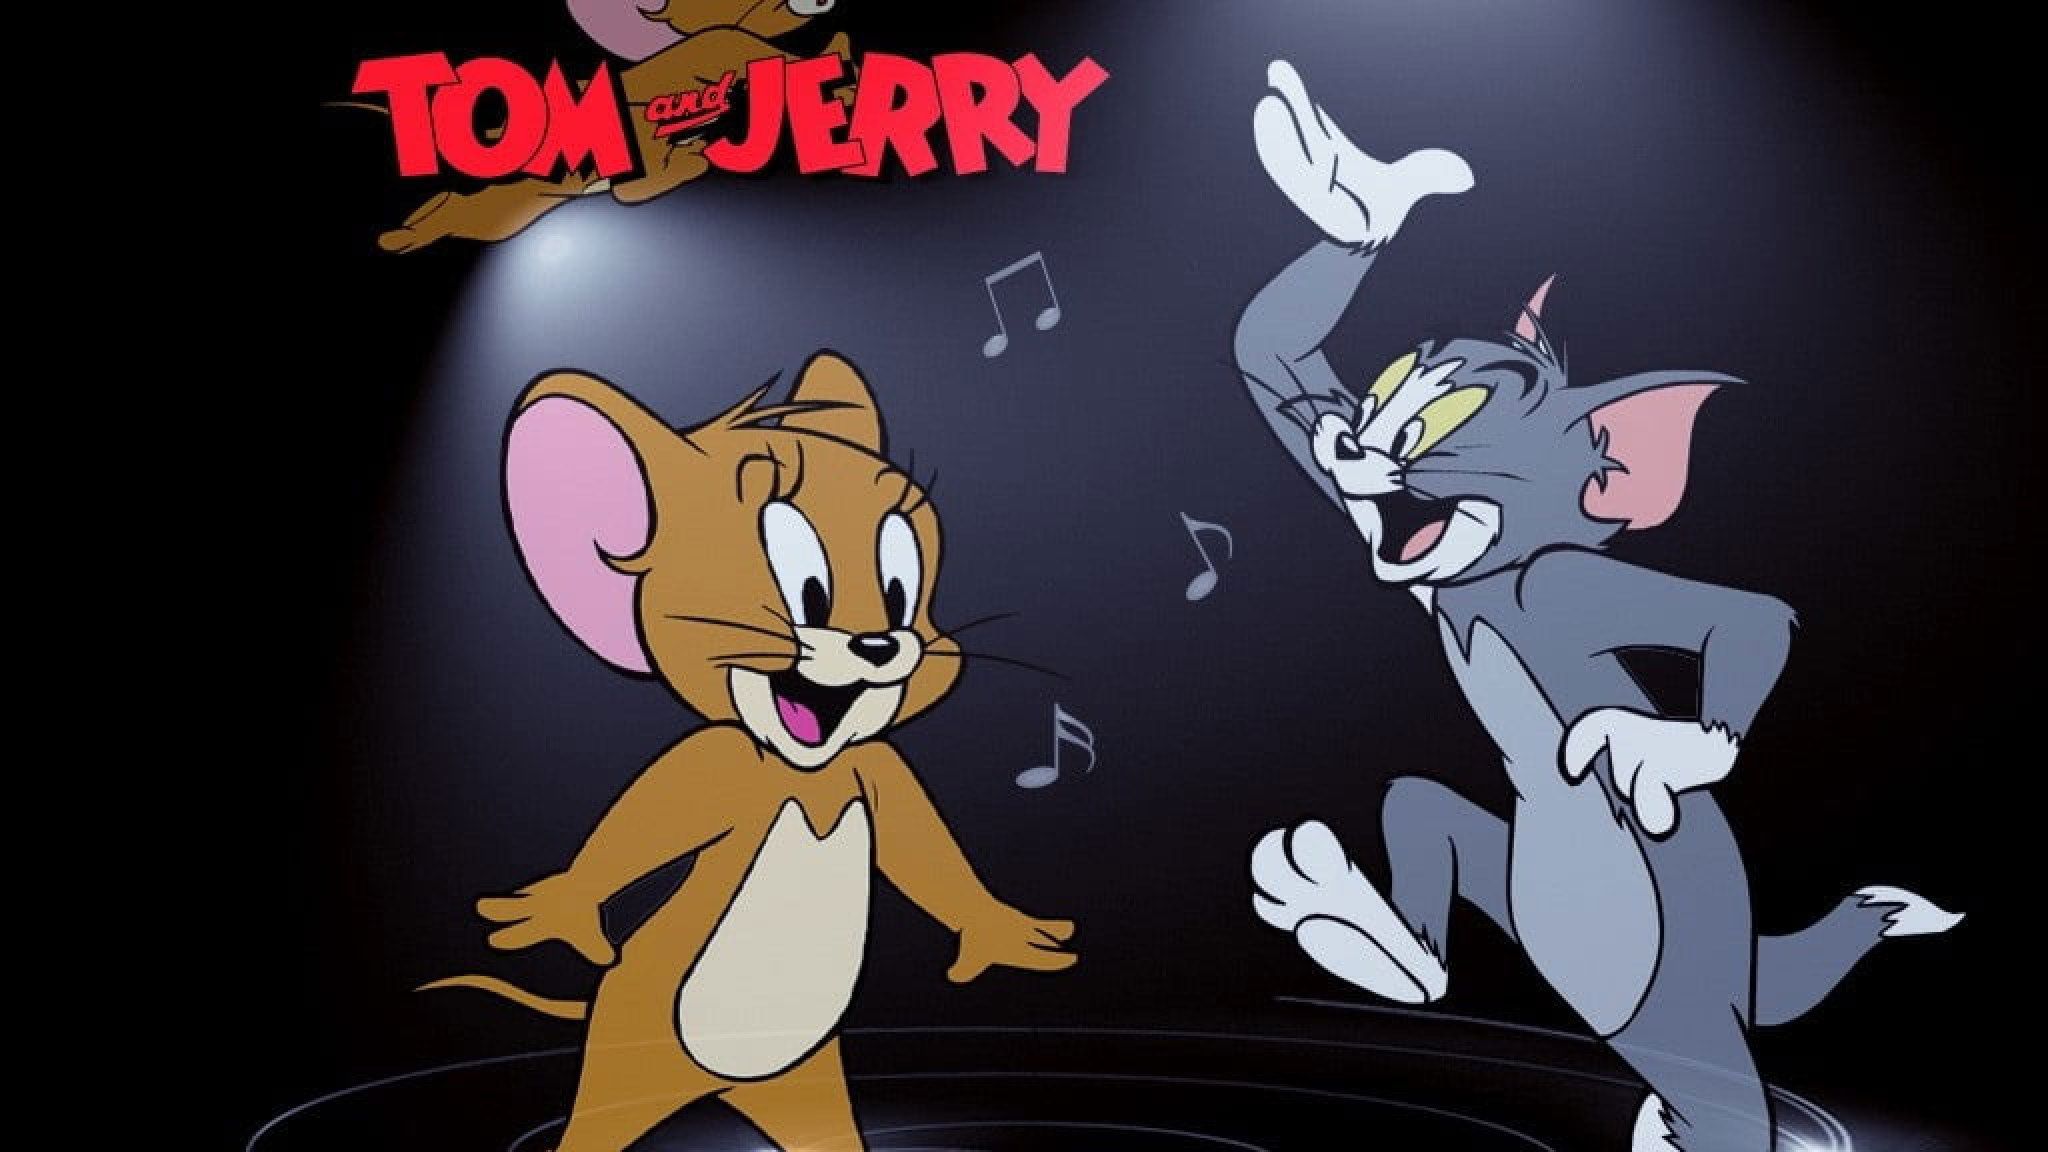 Funny wallpaper Dancing Tom And Jerry, Tom and Jerry wallpaper, Cartoons • Wallpaper For You HD Wallpaper For Desktop & Mobile